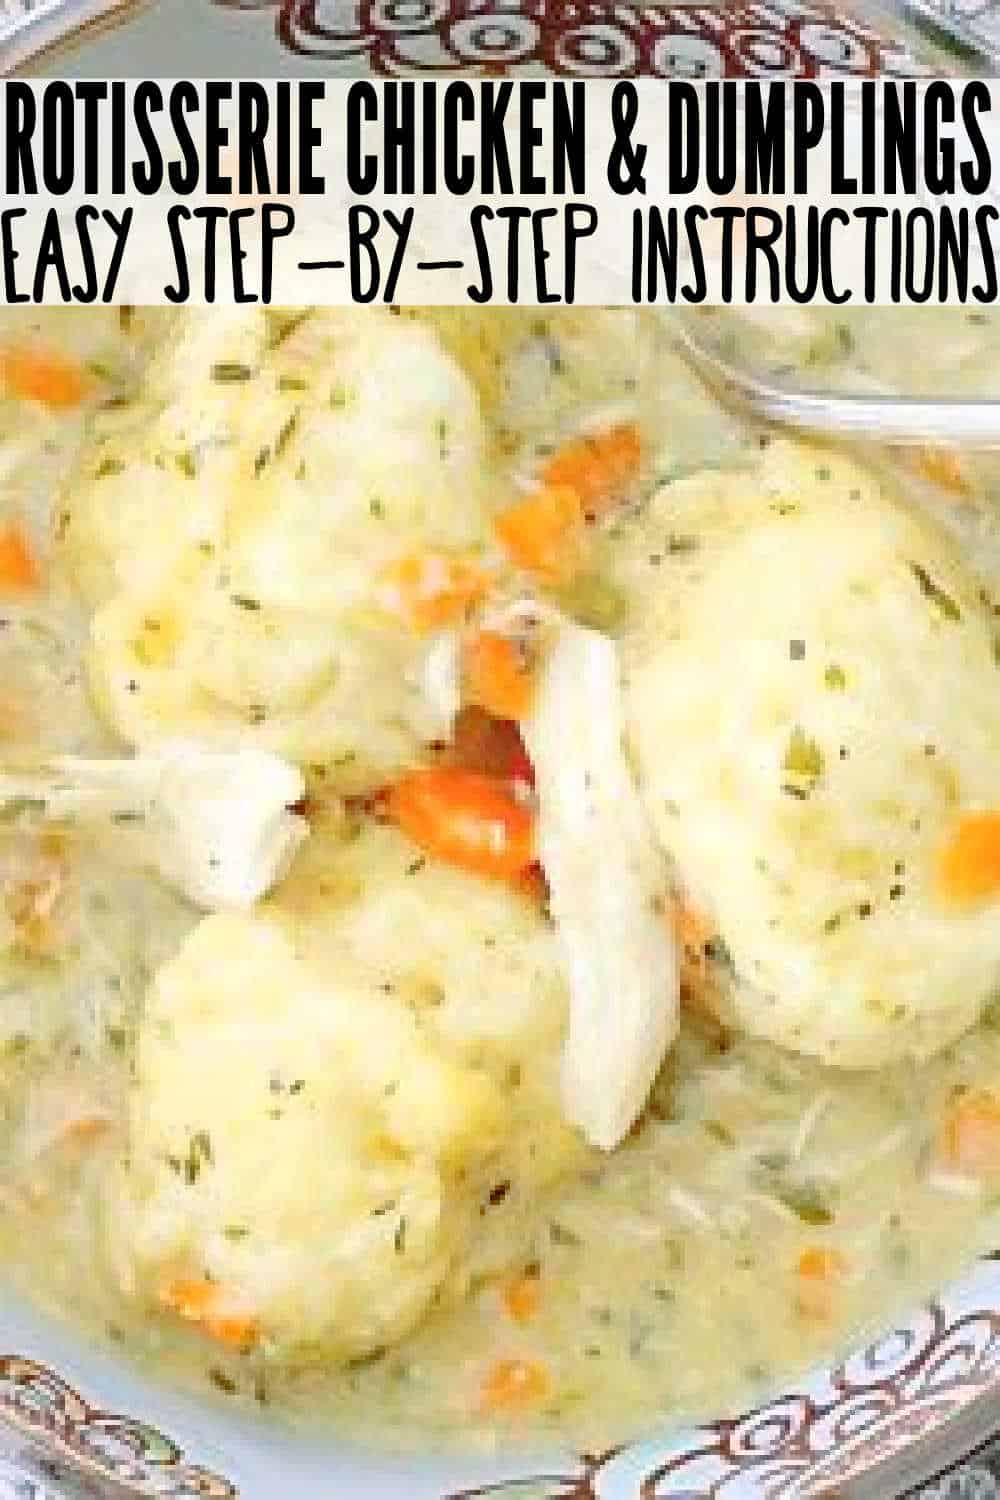 These simply delicious chicken and dumplings have thousands of fans. The chicken stew takes help from a rotisserie chicken, but the dumplings are made from-scratch and practically fool-proof. via @foodtasticmom